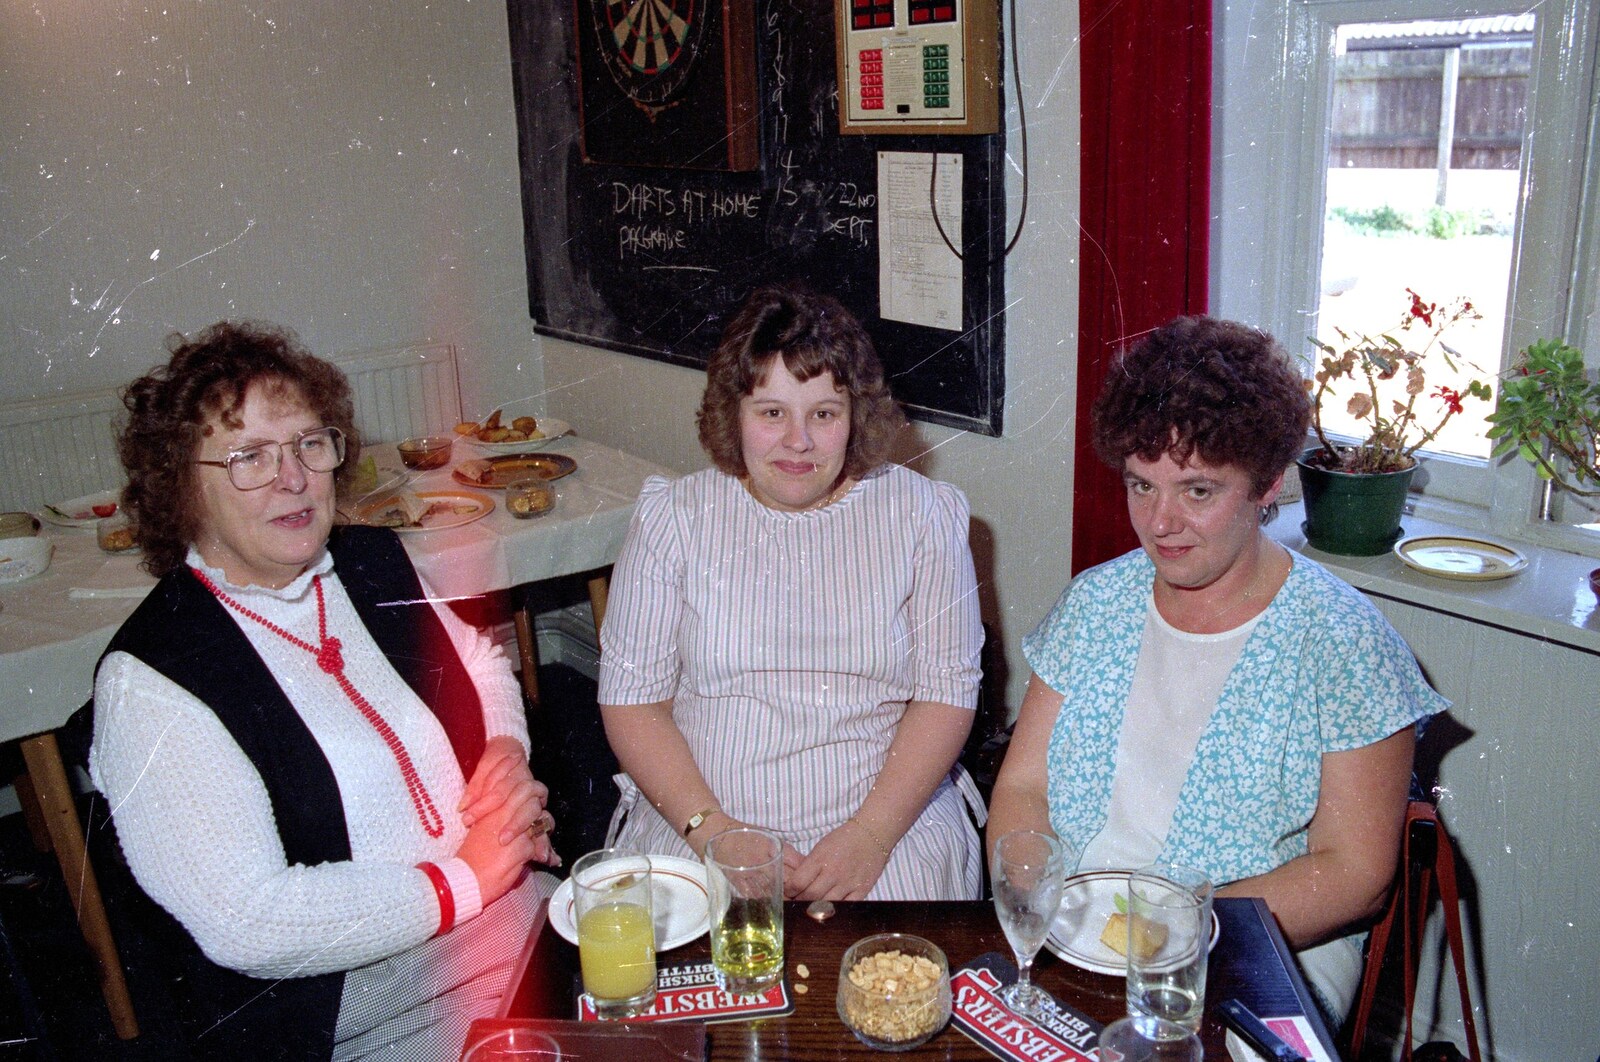 Beryl, Wendy and Cripsy in the Railway, Diss from Kite Flying, and an Introduction to BPCC Printec, Diss, Norfolk - 3rd August 1989